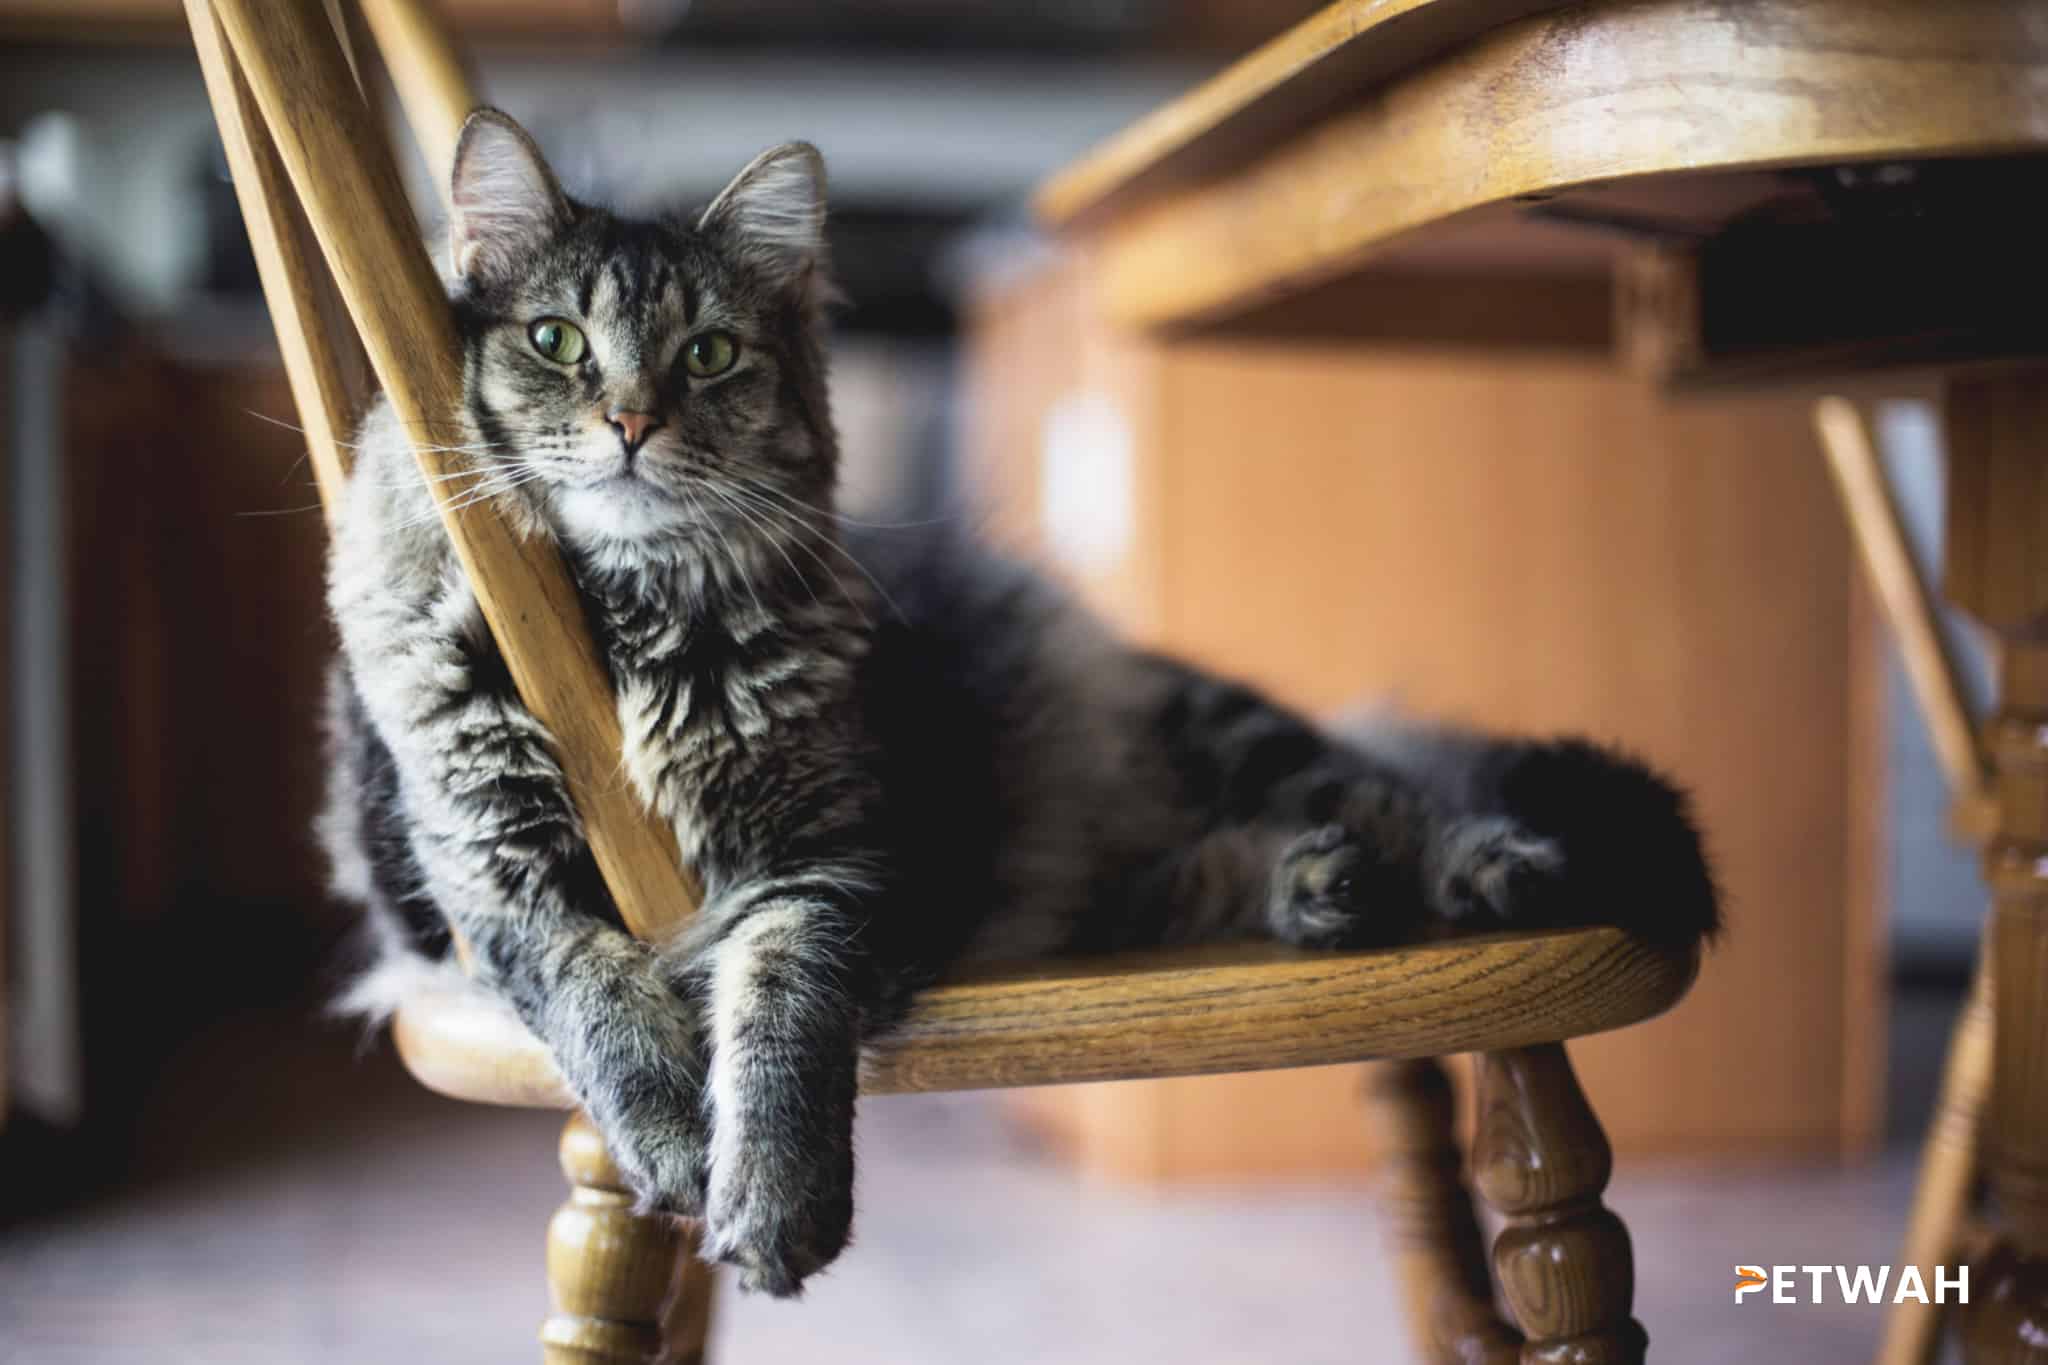 Tips for Keeping Your Cat Content While You're Away